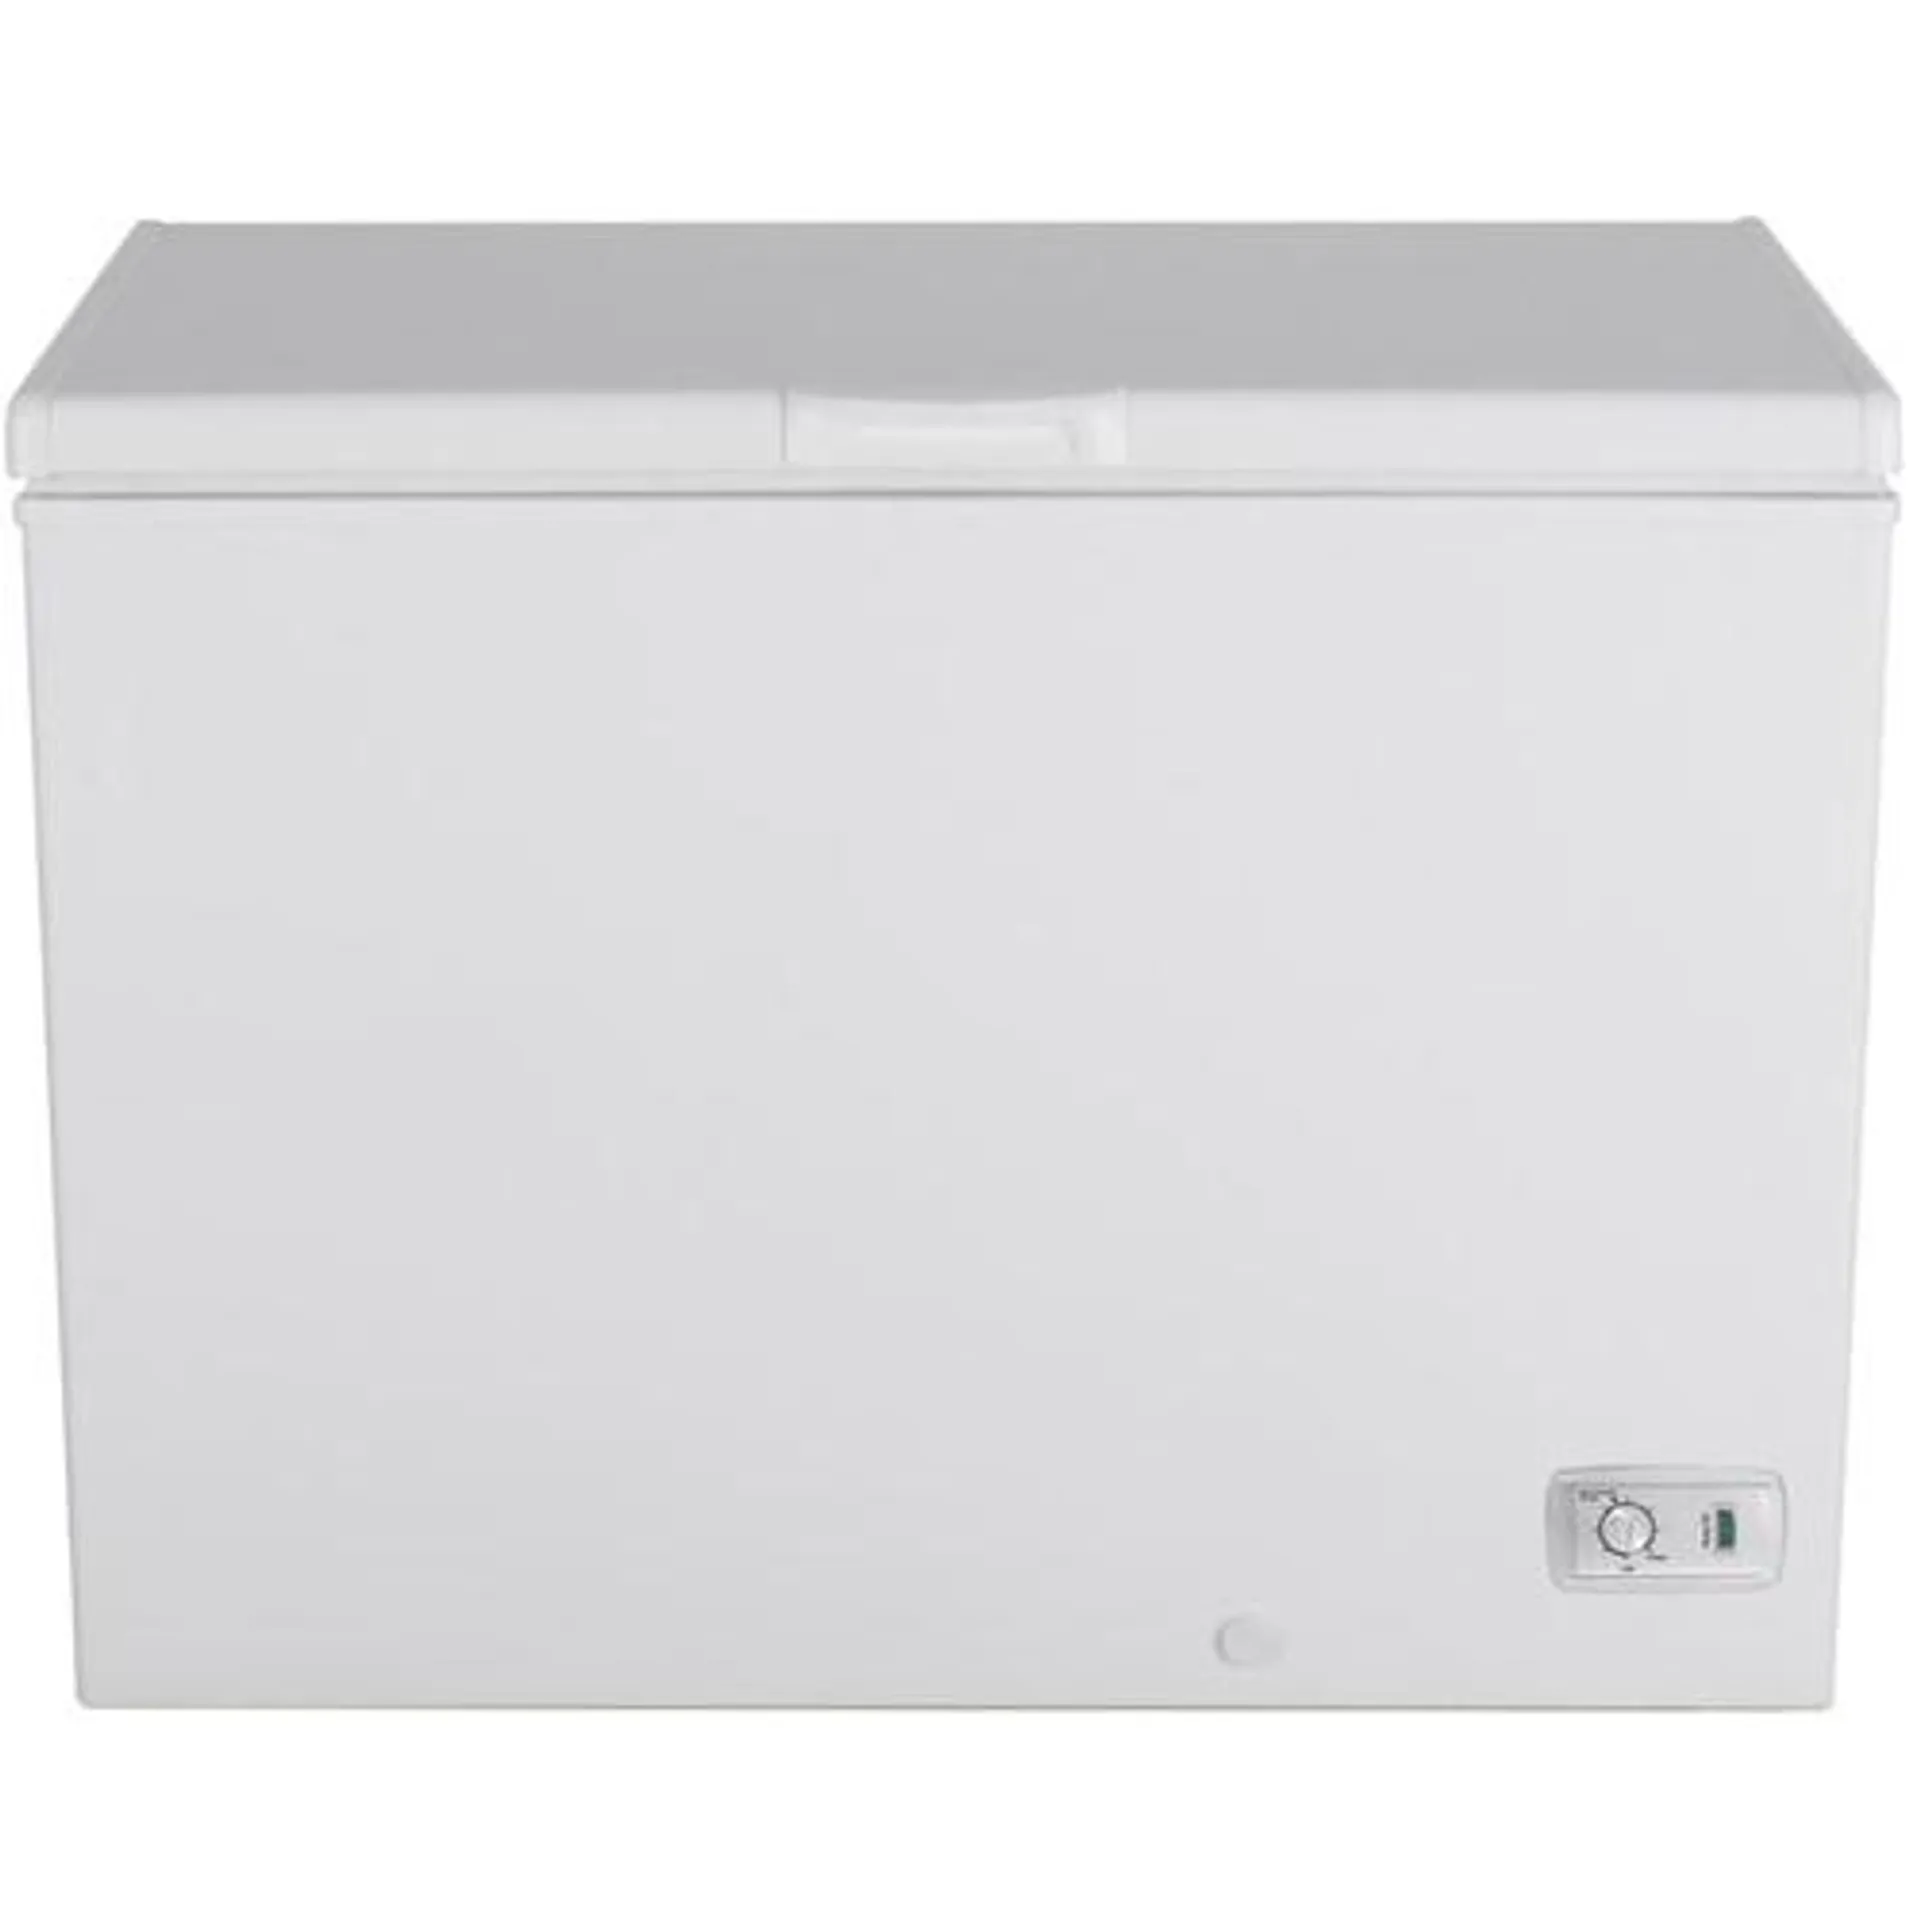 8.8 CuFt Manual Defrost Chest Freezer in White